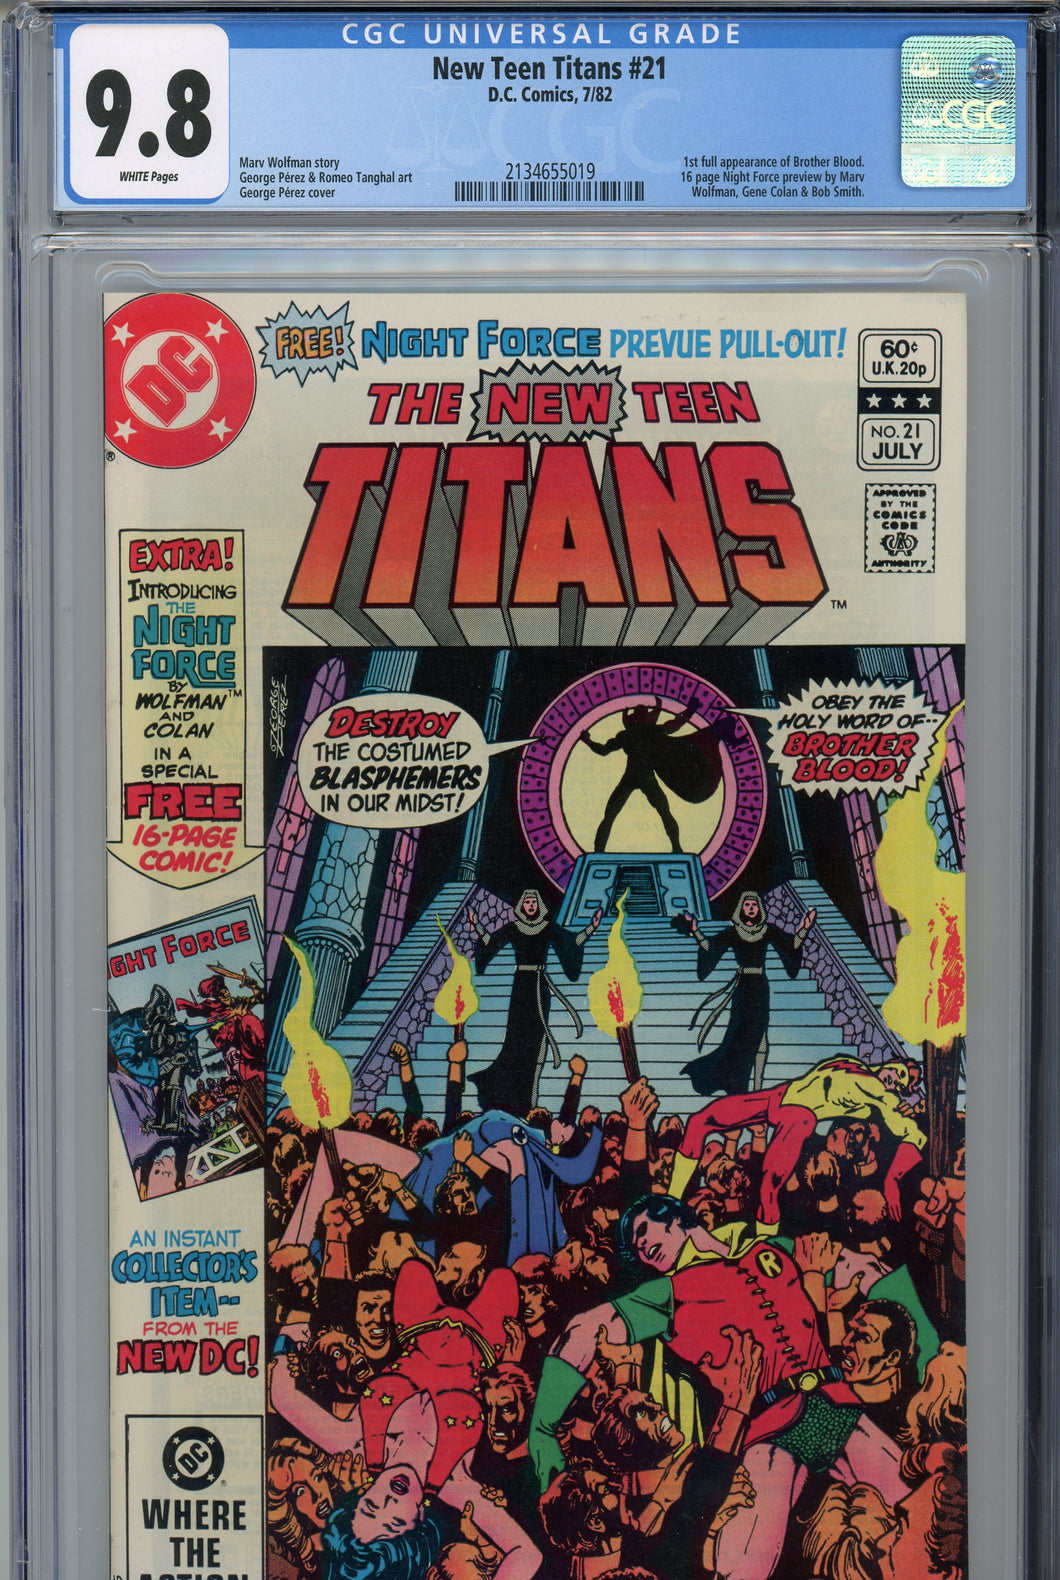 New Teen Titans #21 CGC 9.8 1st Appearance of Brother Blood